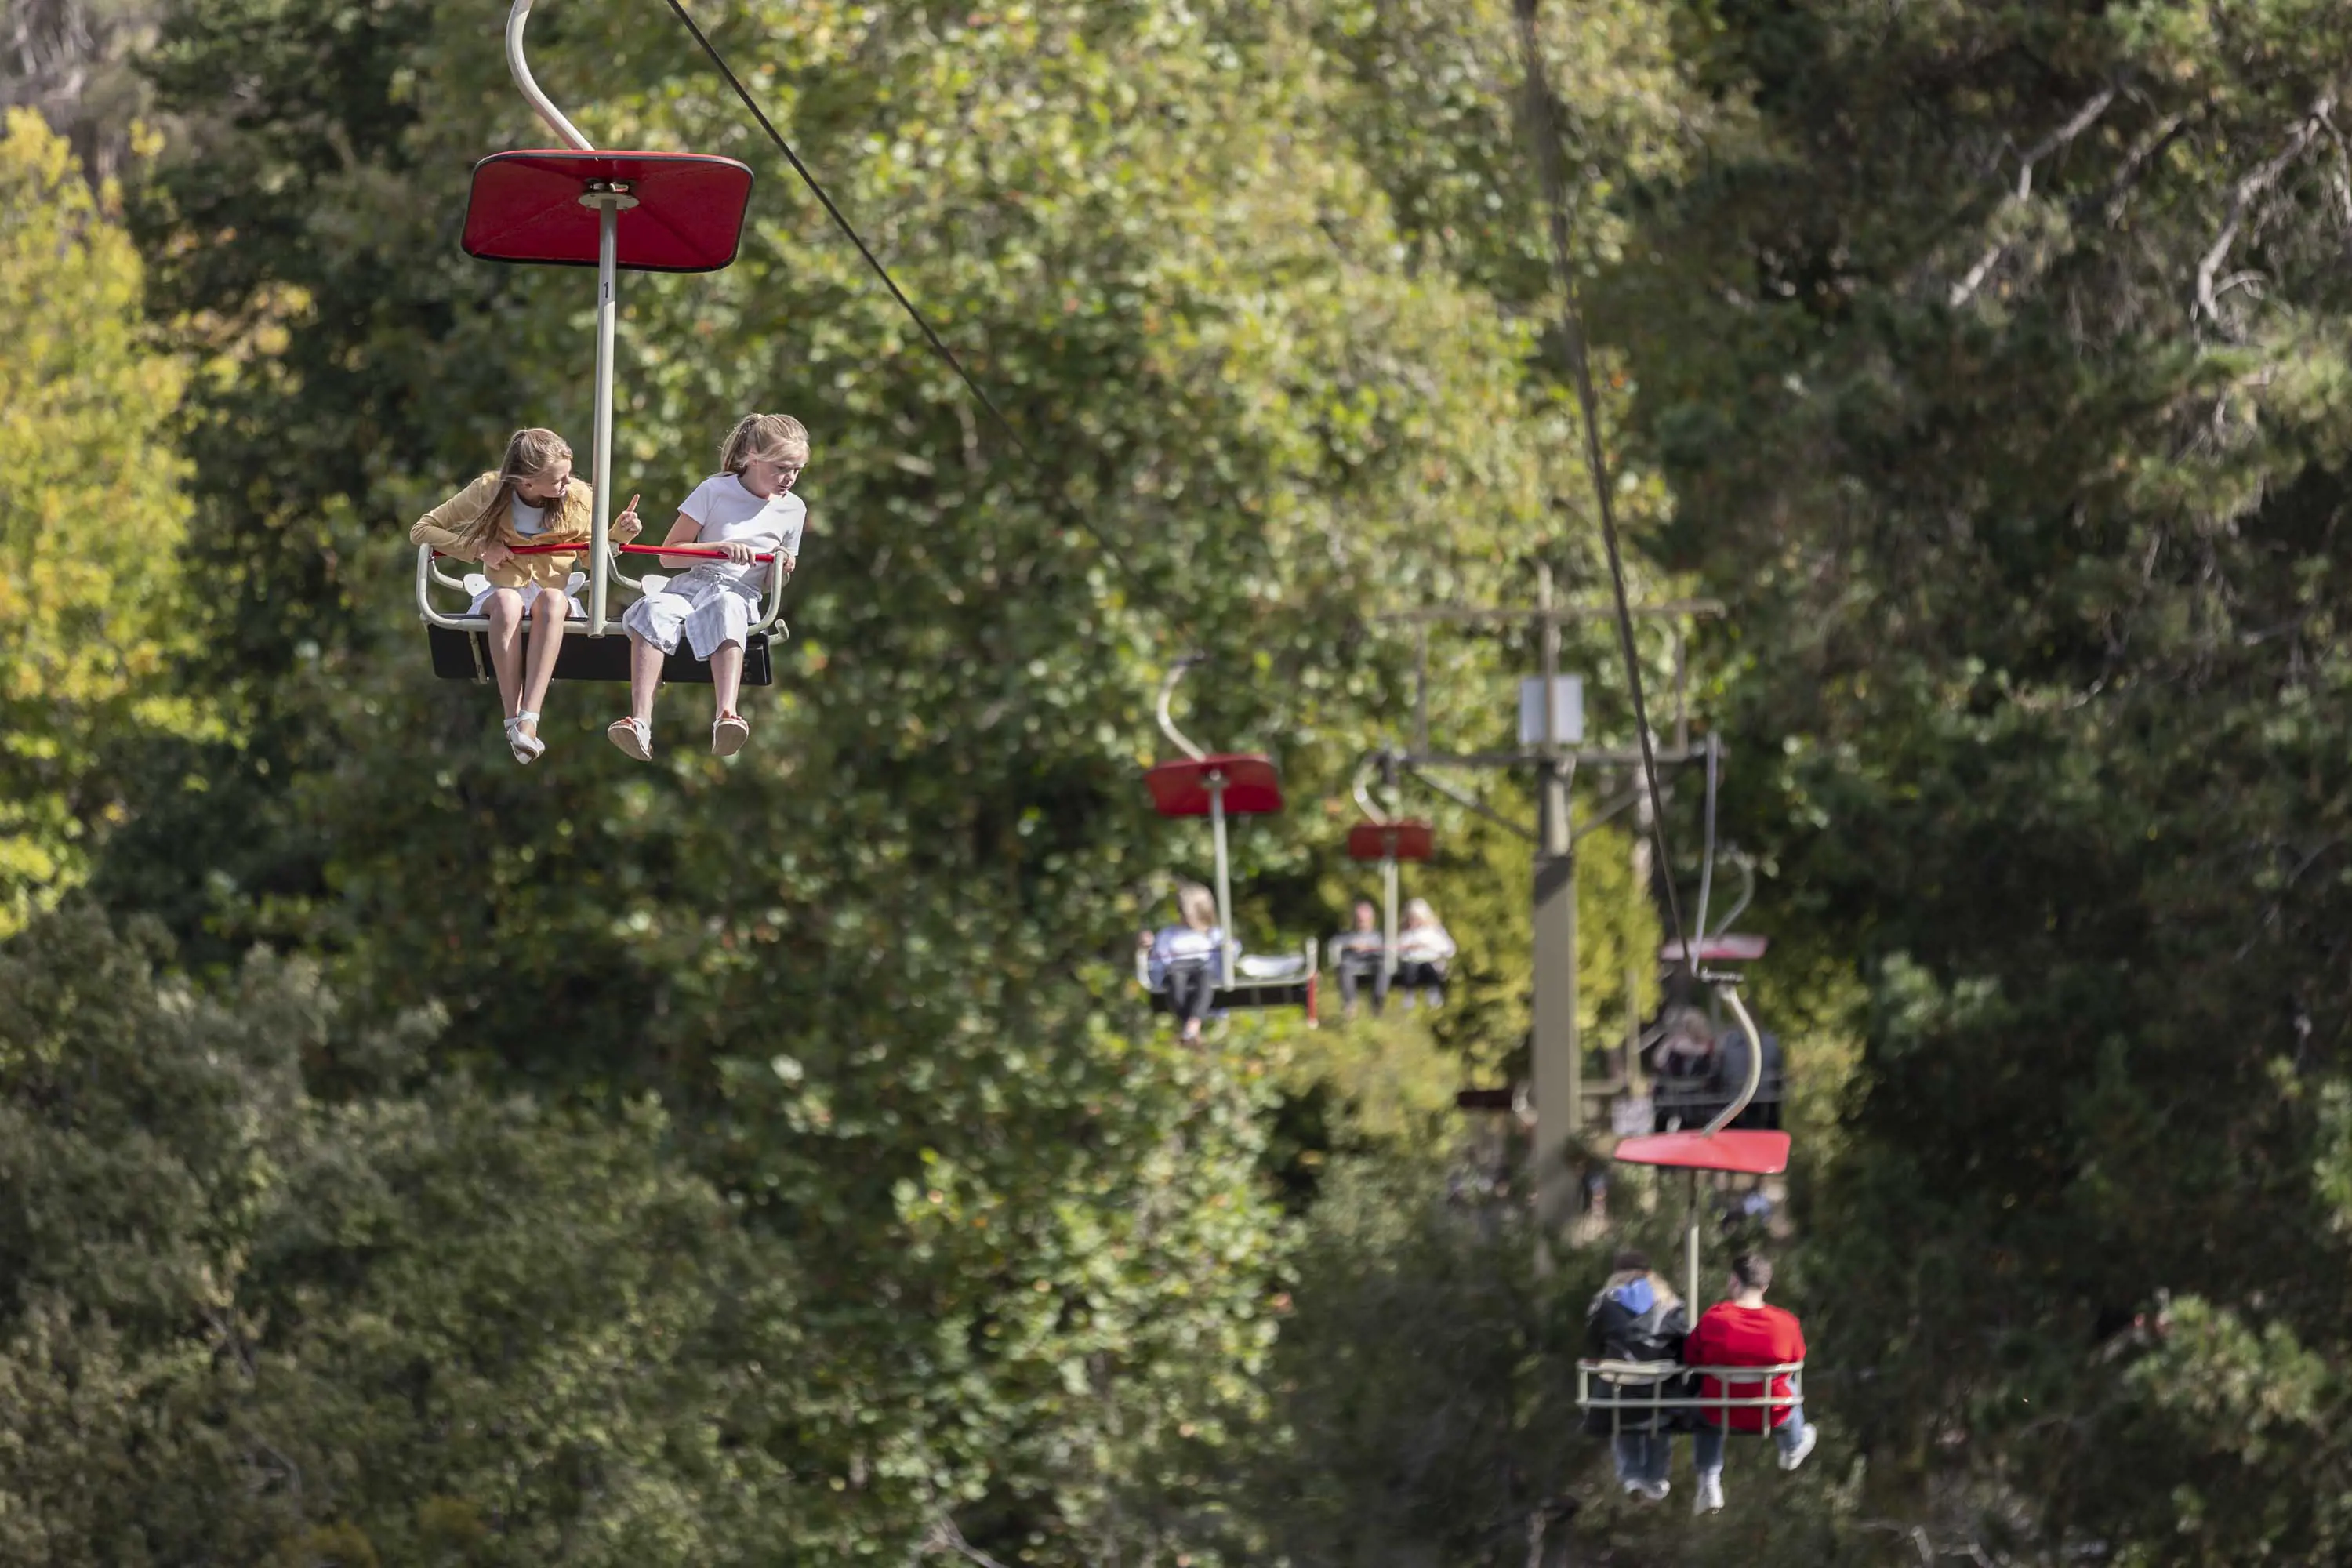 A chairlift cable with several chairs traverses a park full of tall, leafy green trees. Two girls lean in their chars and look down from their seats.